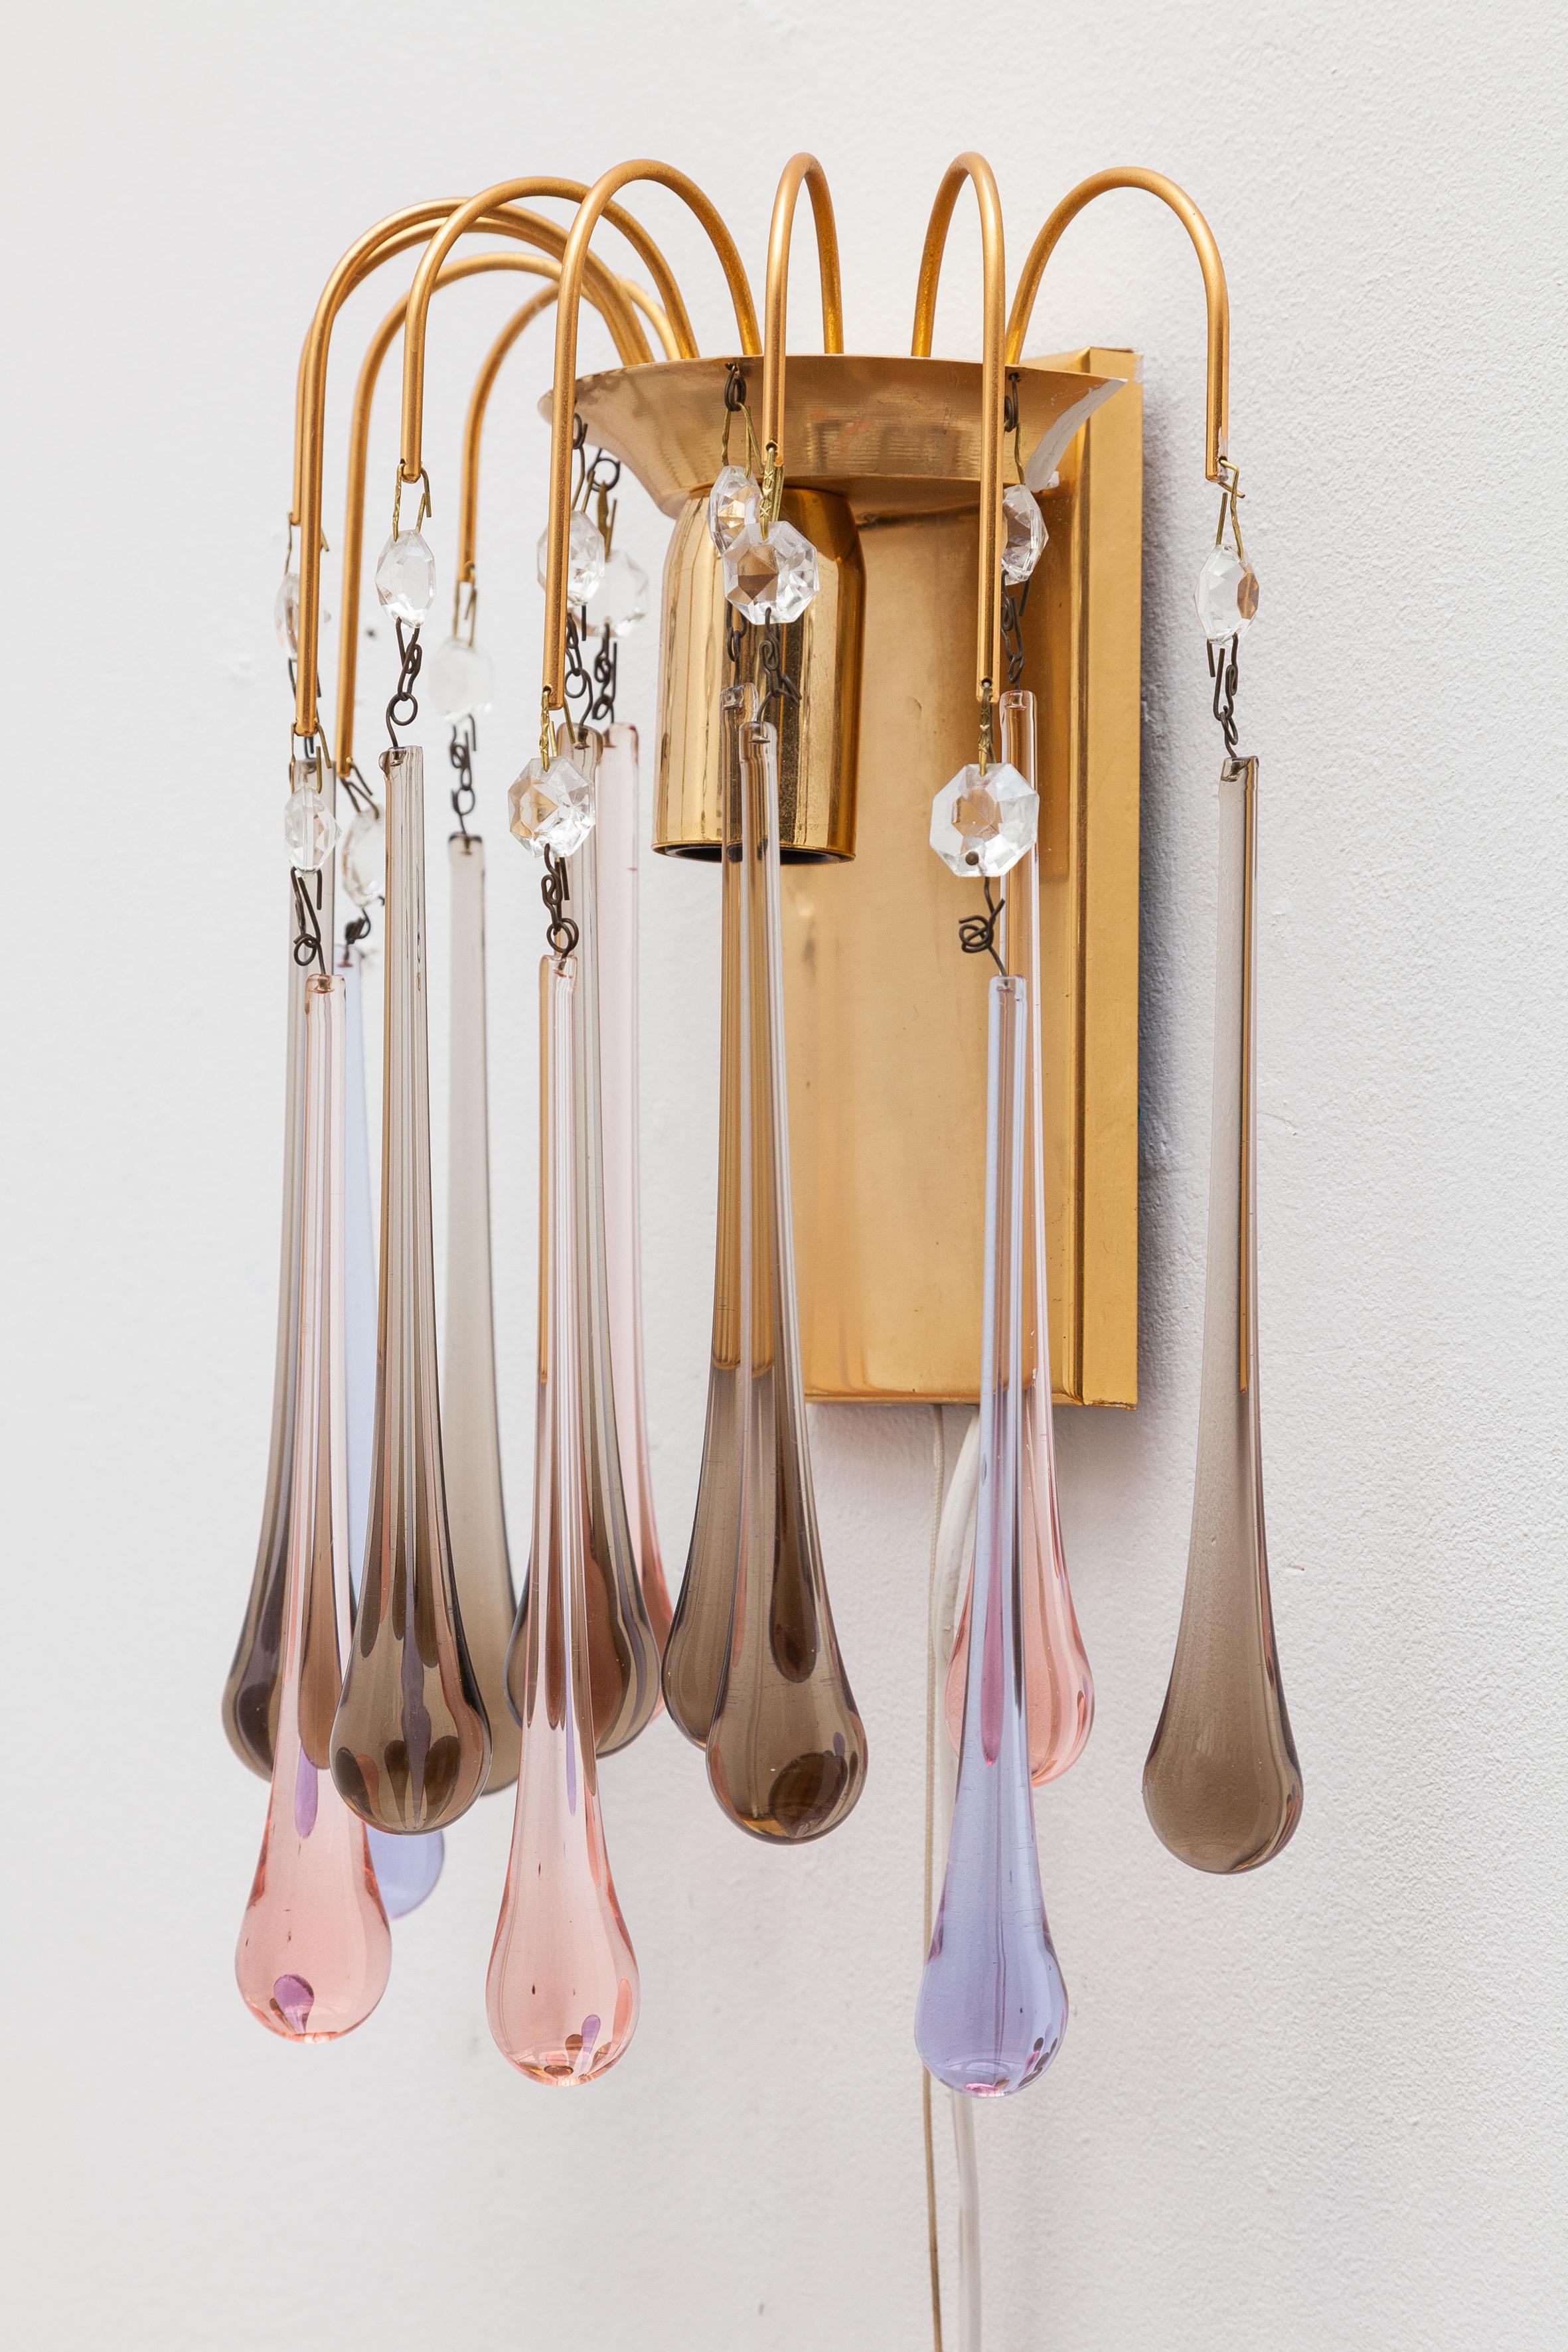 Vintage 1970s wall sconce set. Bright brass frames suspend crystal drops in beautiful shades of lavender, pink and smoked glass.

Both lit by 1 bulb.
Dimension: Sconce:
19W x 30H x 10D cm
Wiring has been checked by a qualified electrician and